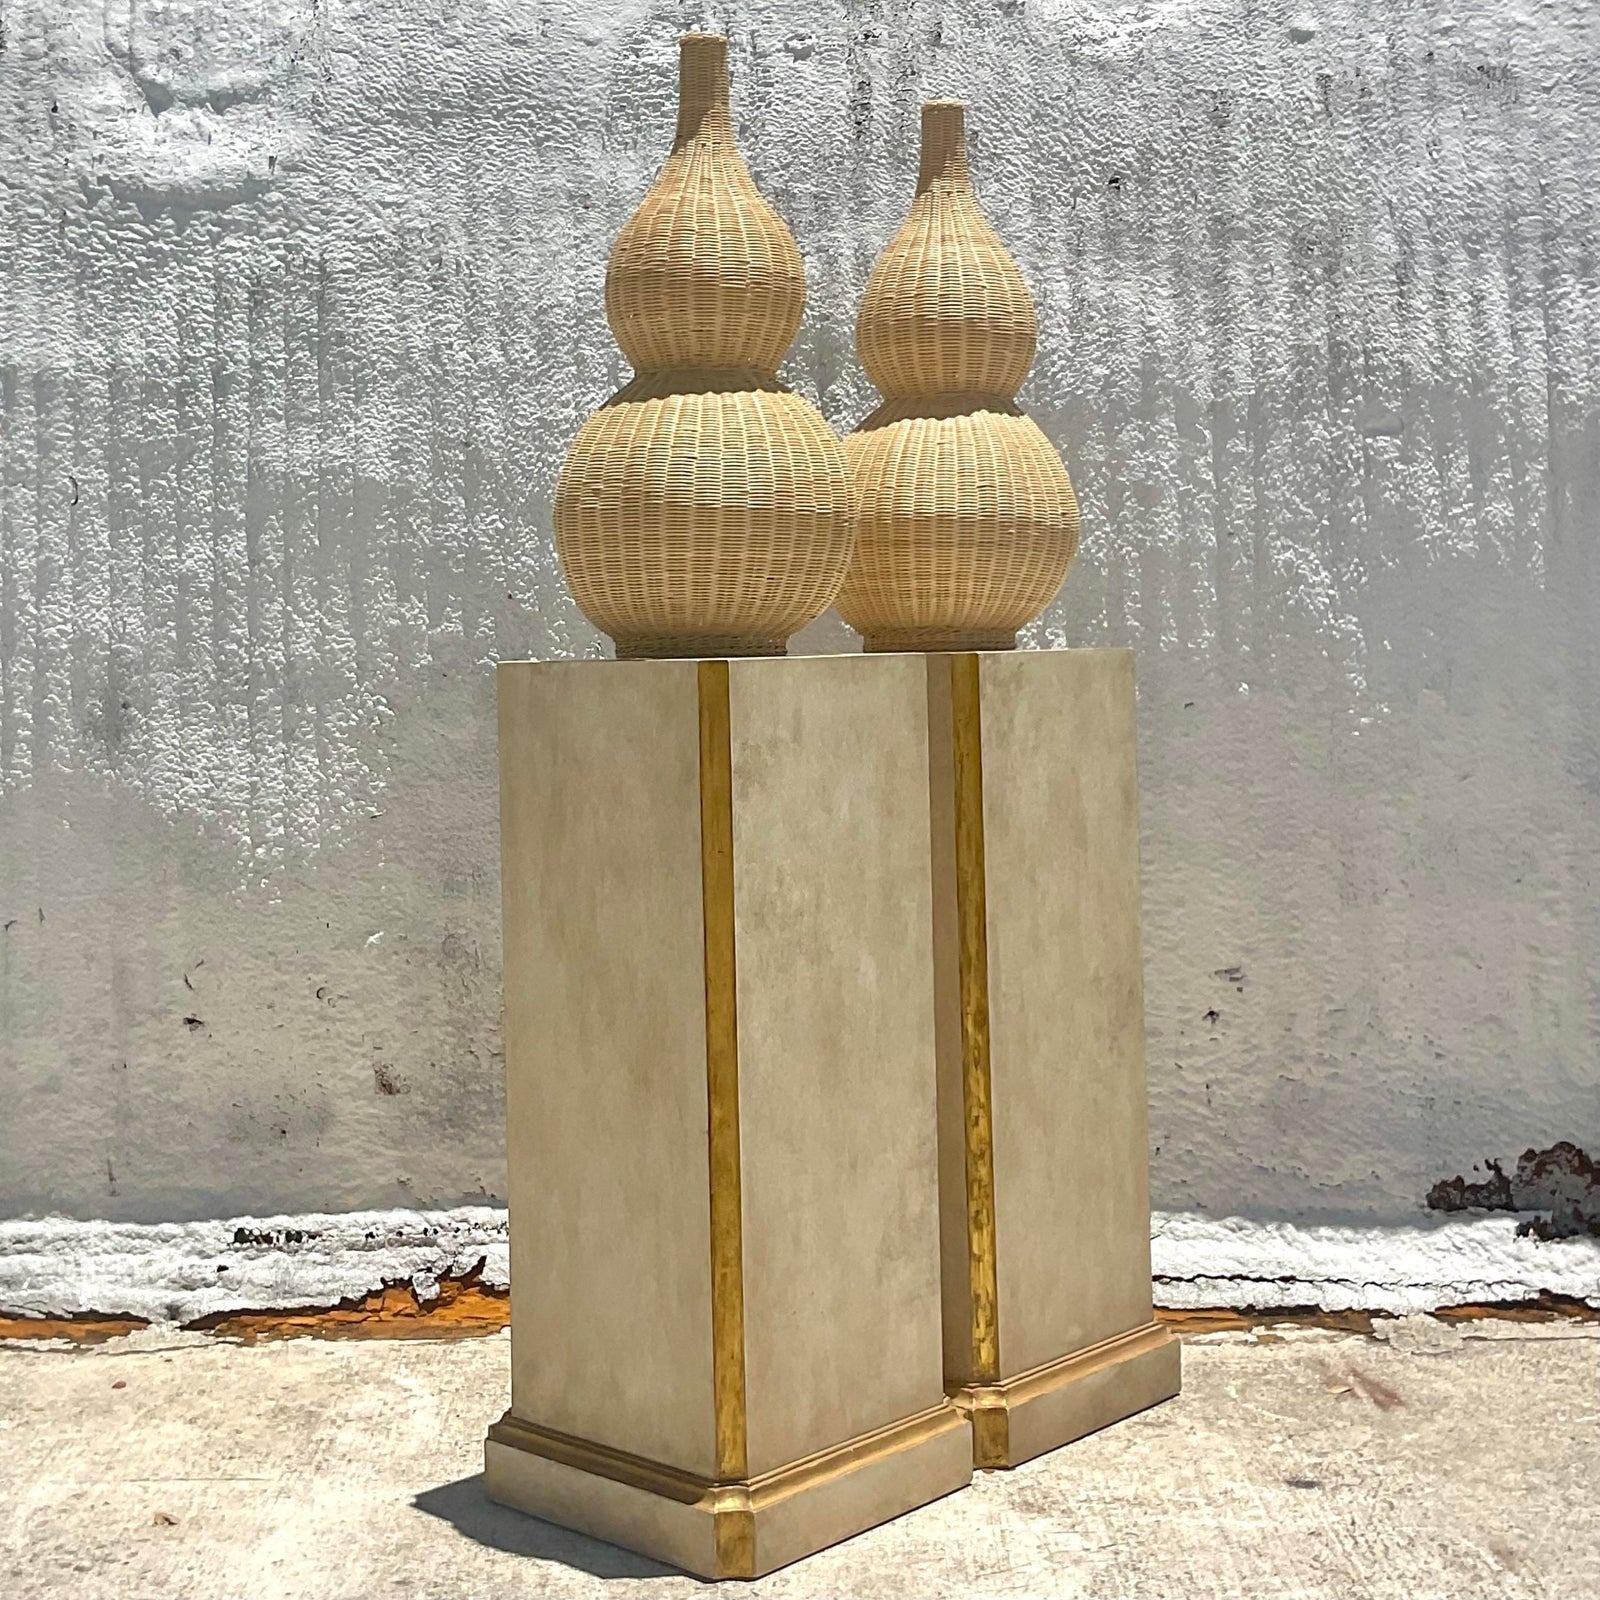 An extraordinary pair of vintage Regency pedestals. Tall and chic with a patinated white finish and gilt tipping. Perfect for your statuary, urns or flowers. You decide! Absolutely incredible. Acquired from a Palm Beach estate.